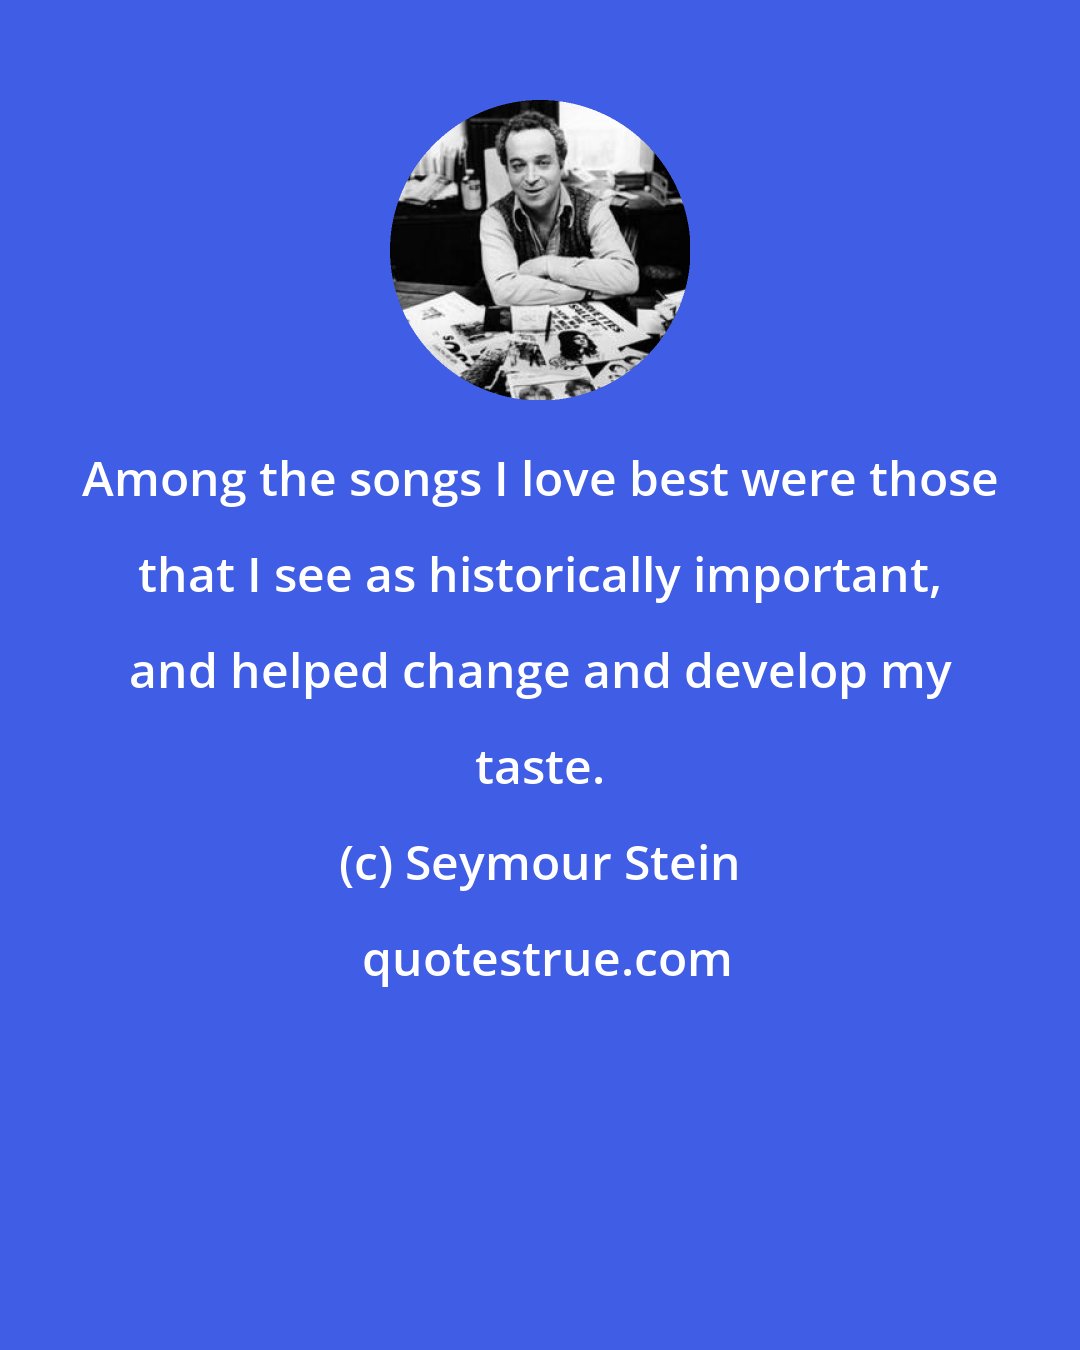 Seymour Stein: Among the songs I love best were those that I see as historically important, and helped change and develop my taste.